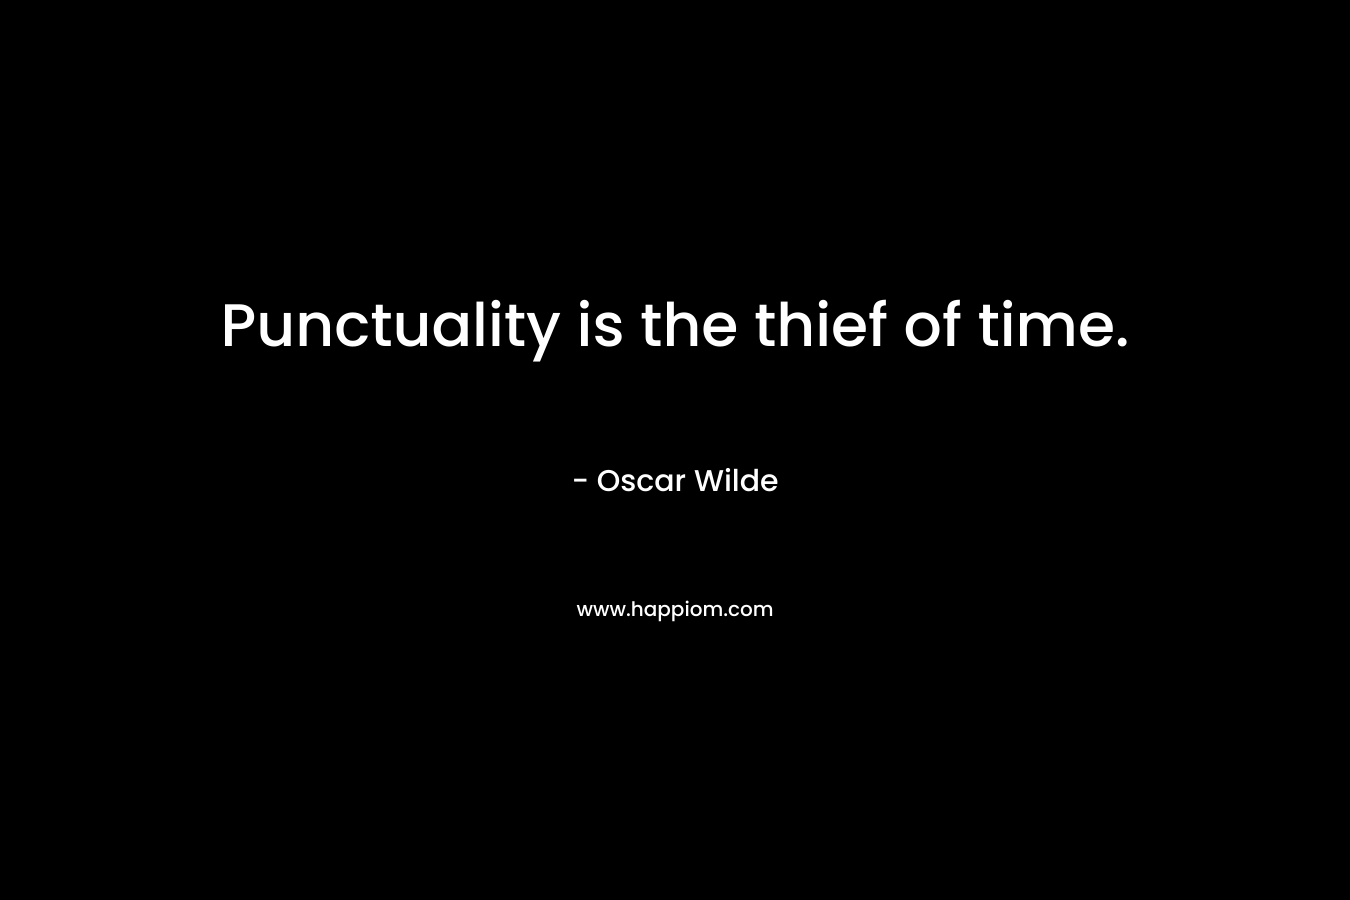 Punctuality is the thief of time.